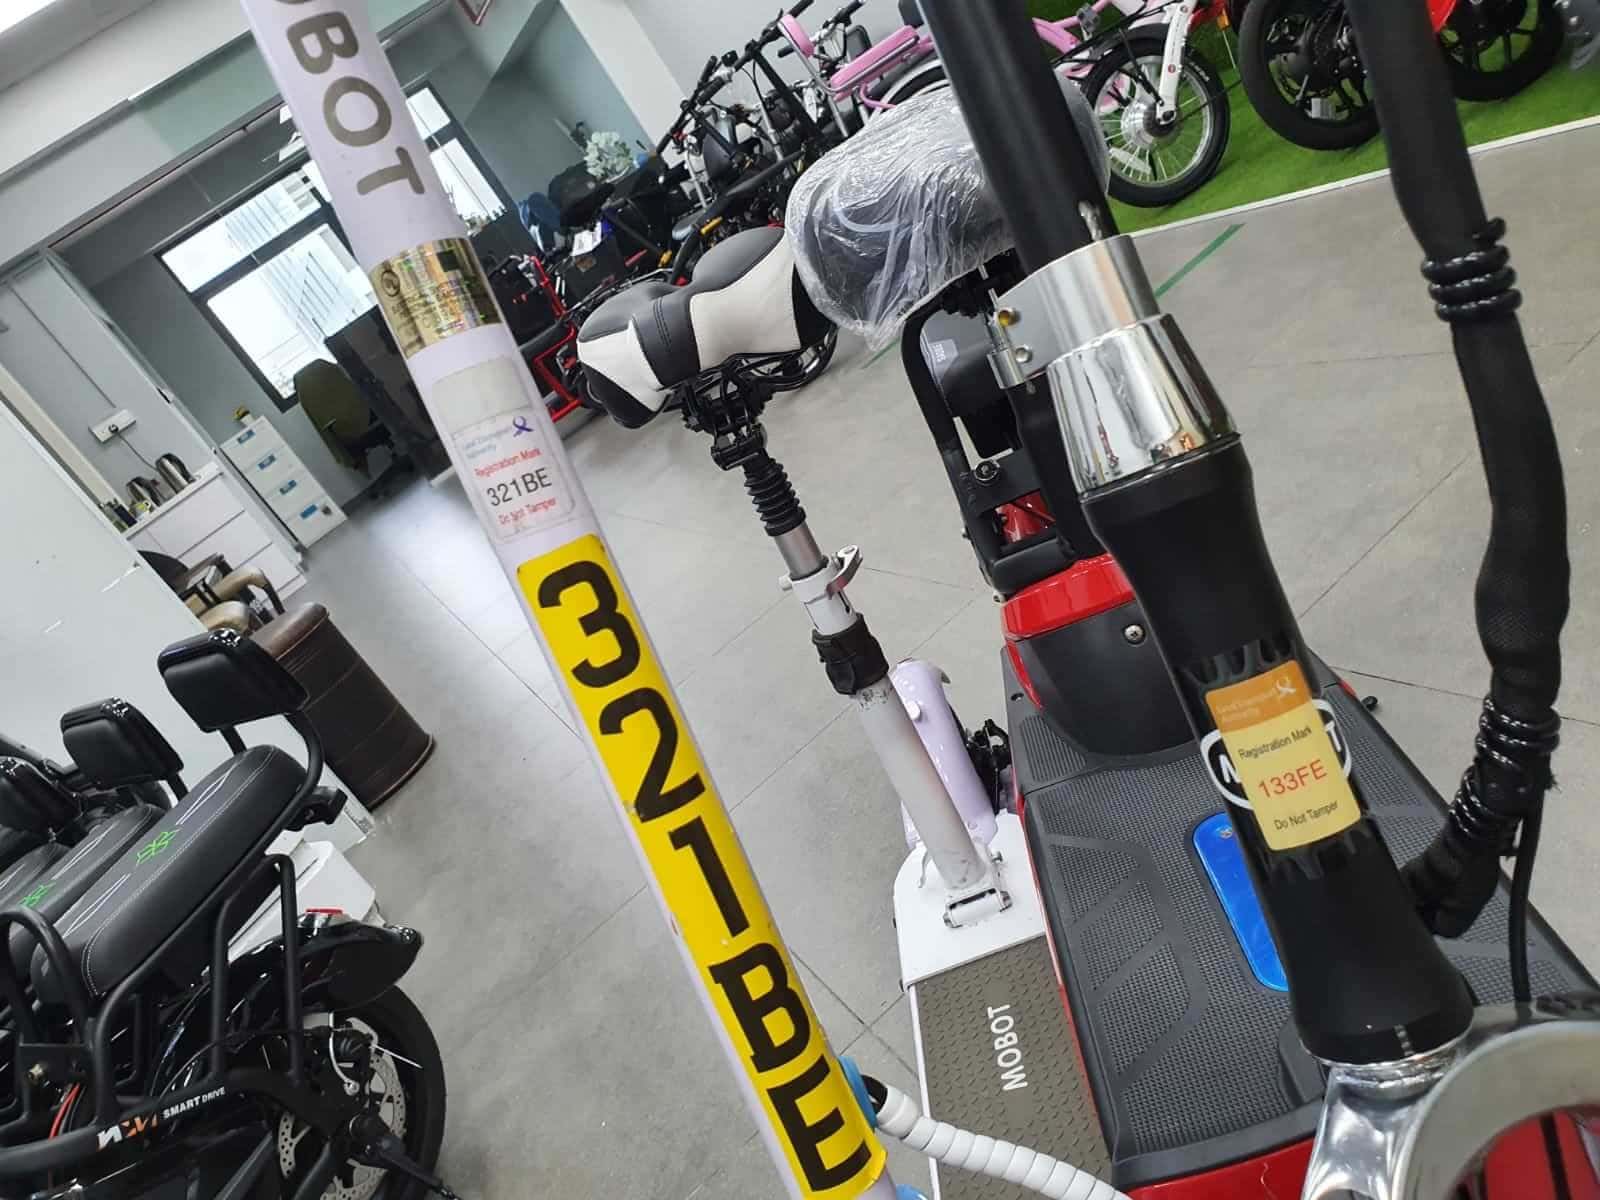 New e scooter yellow registration mark - 5 things you may have missed on LTA E-scooter registration